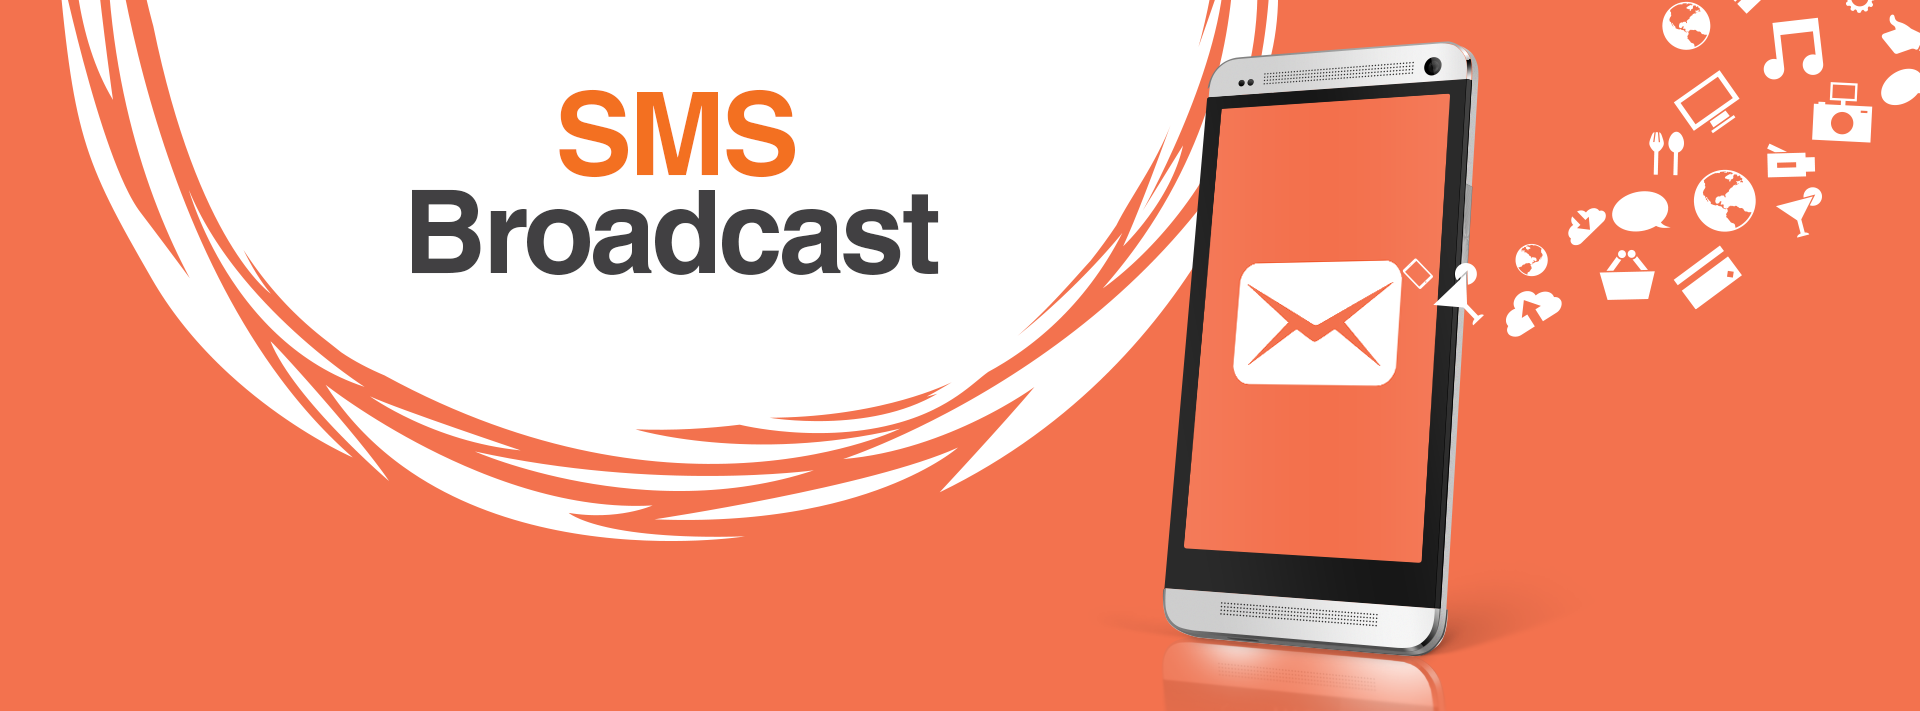 SMS Broadcast software